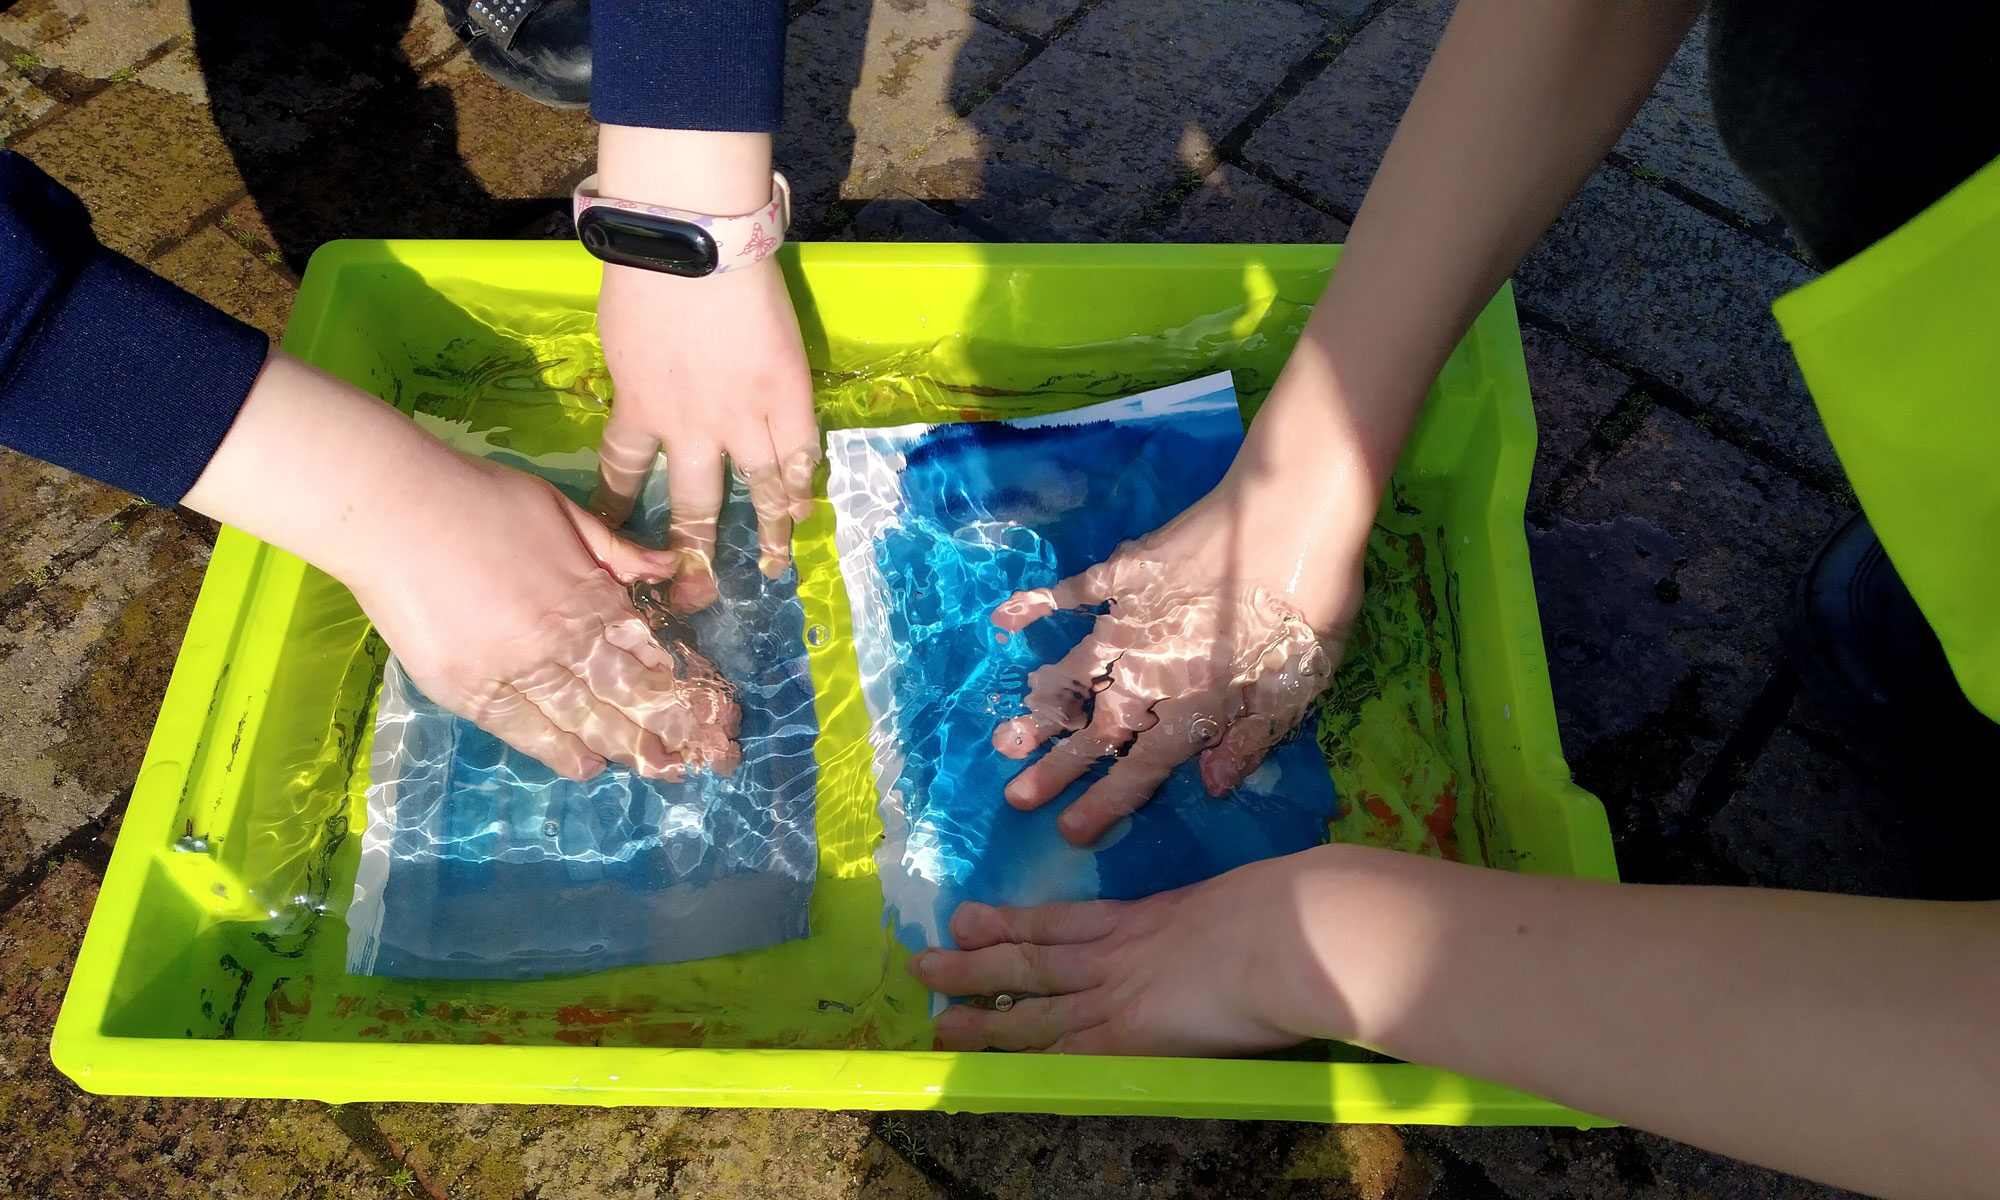 Children's hands in a tub of water